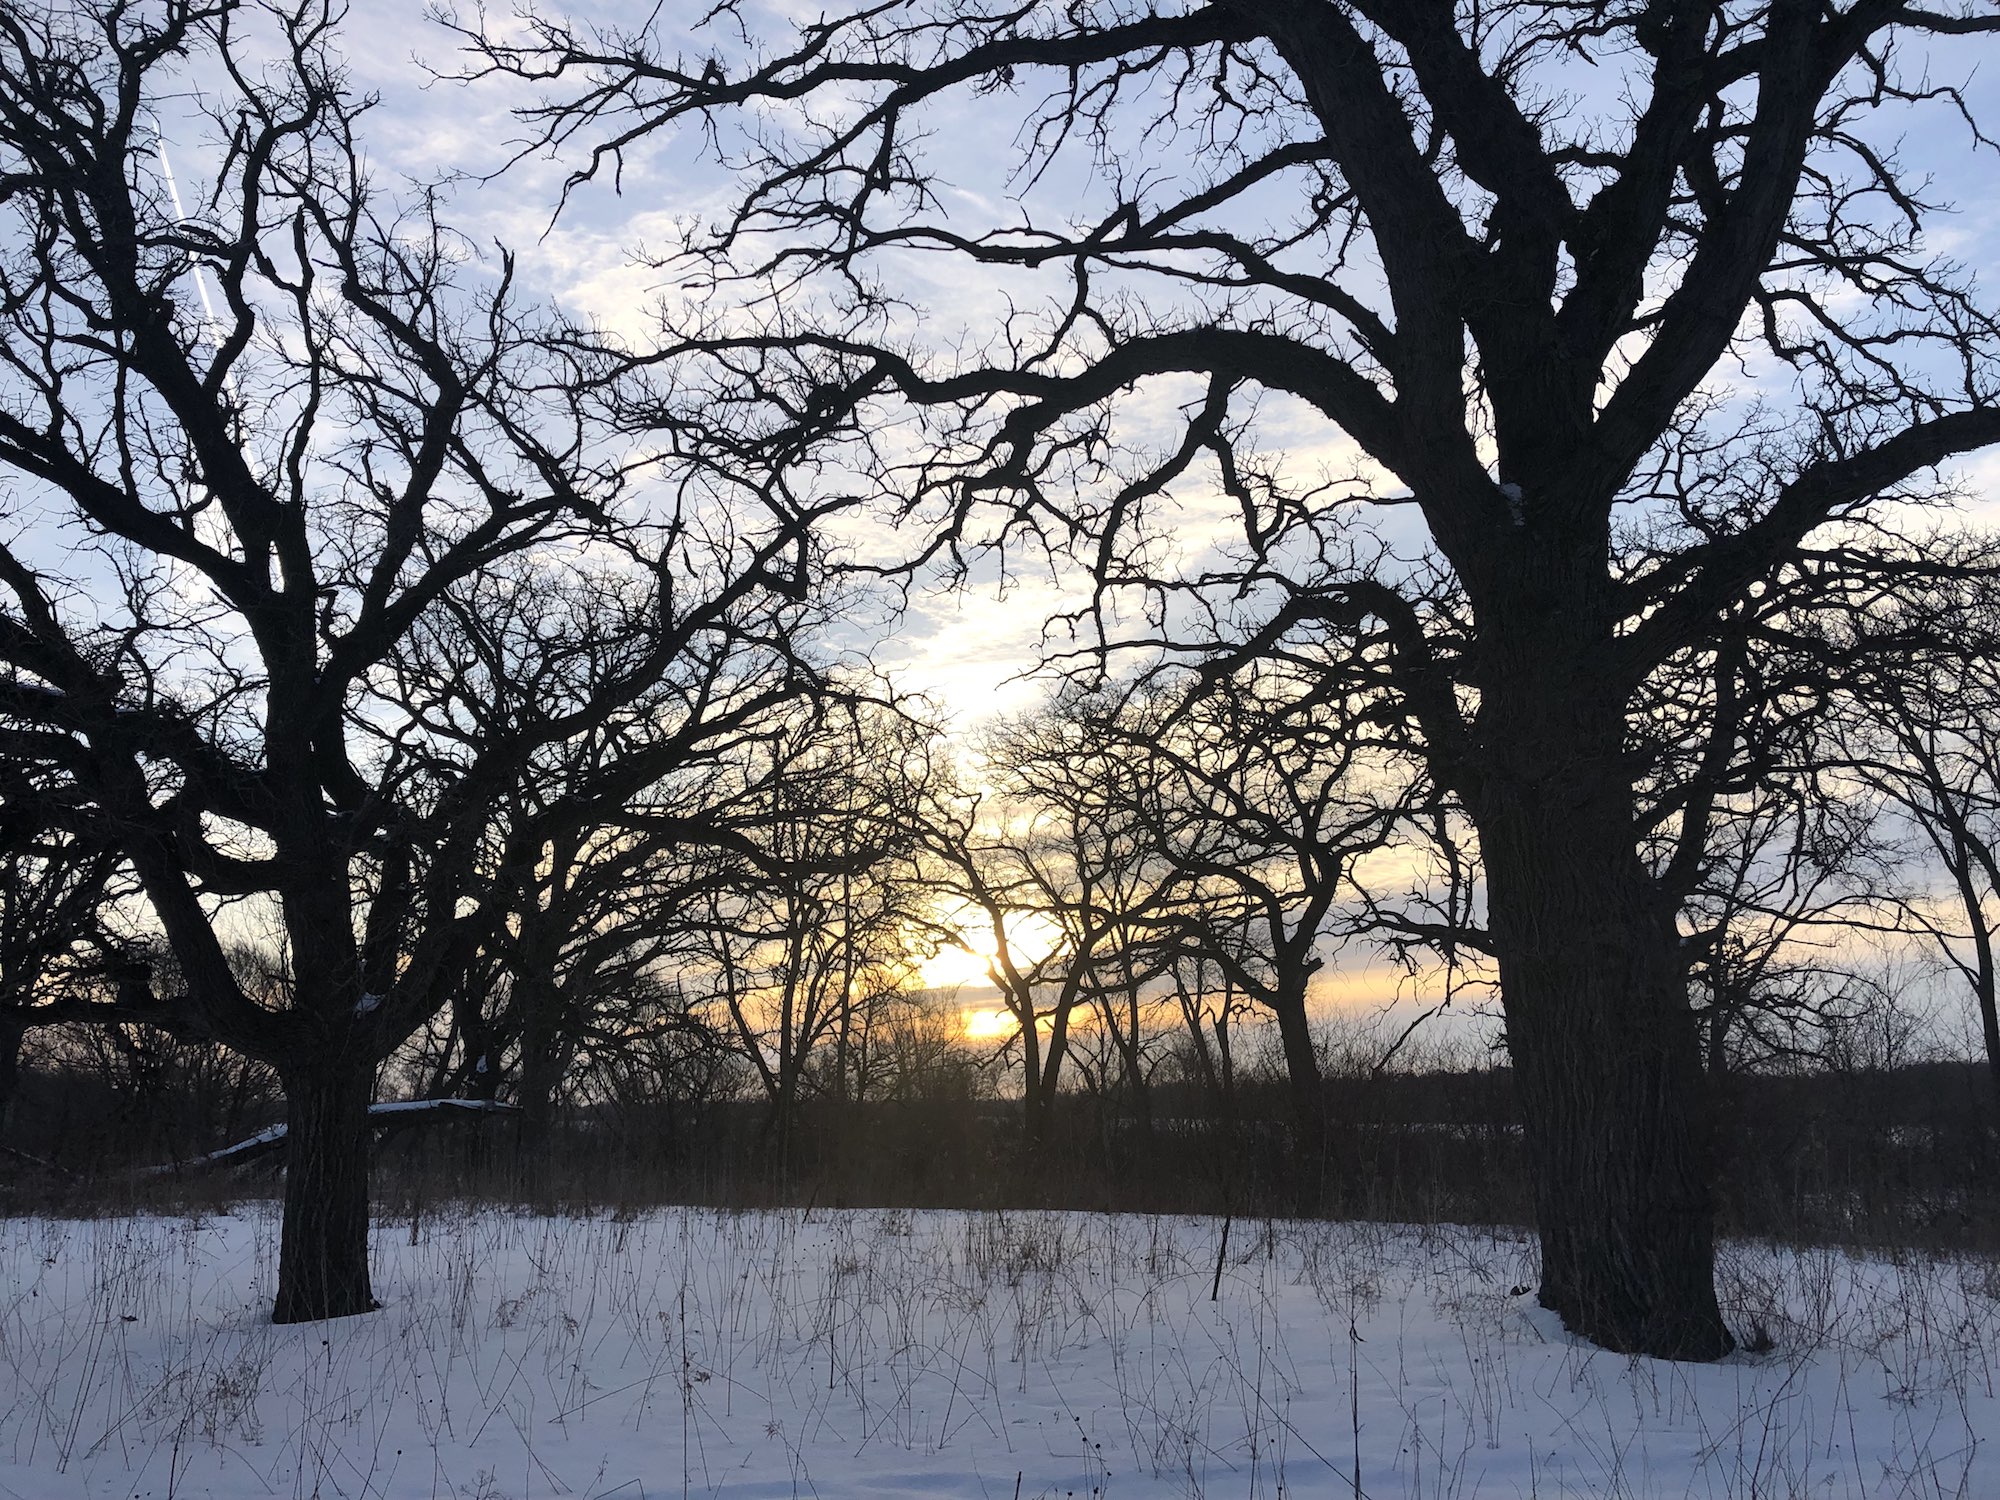 Oak Savanna on March 3, 2019 in University of Wisconsin Arboretum in Madison, Wisconsin on the north shore of Lake Wingra.